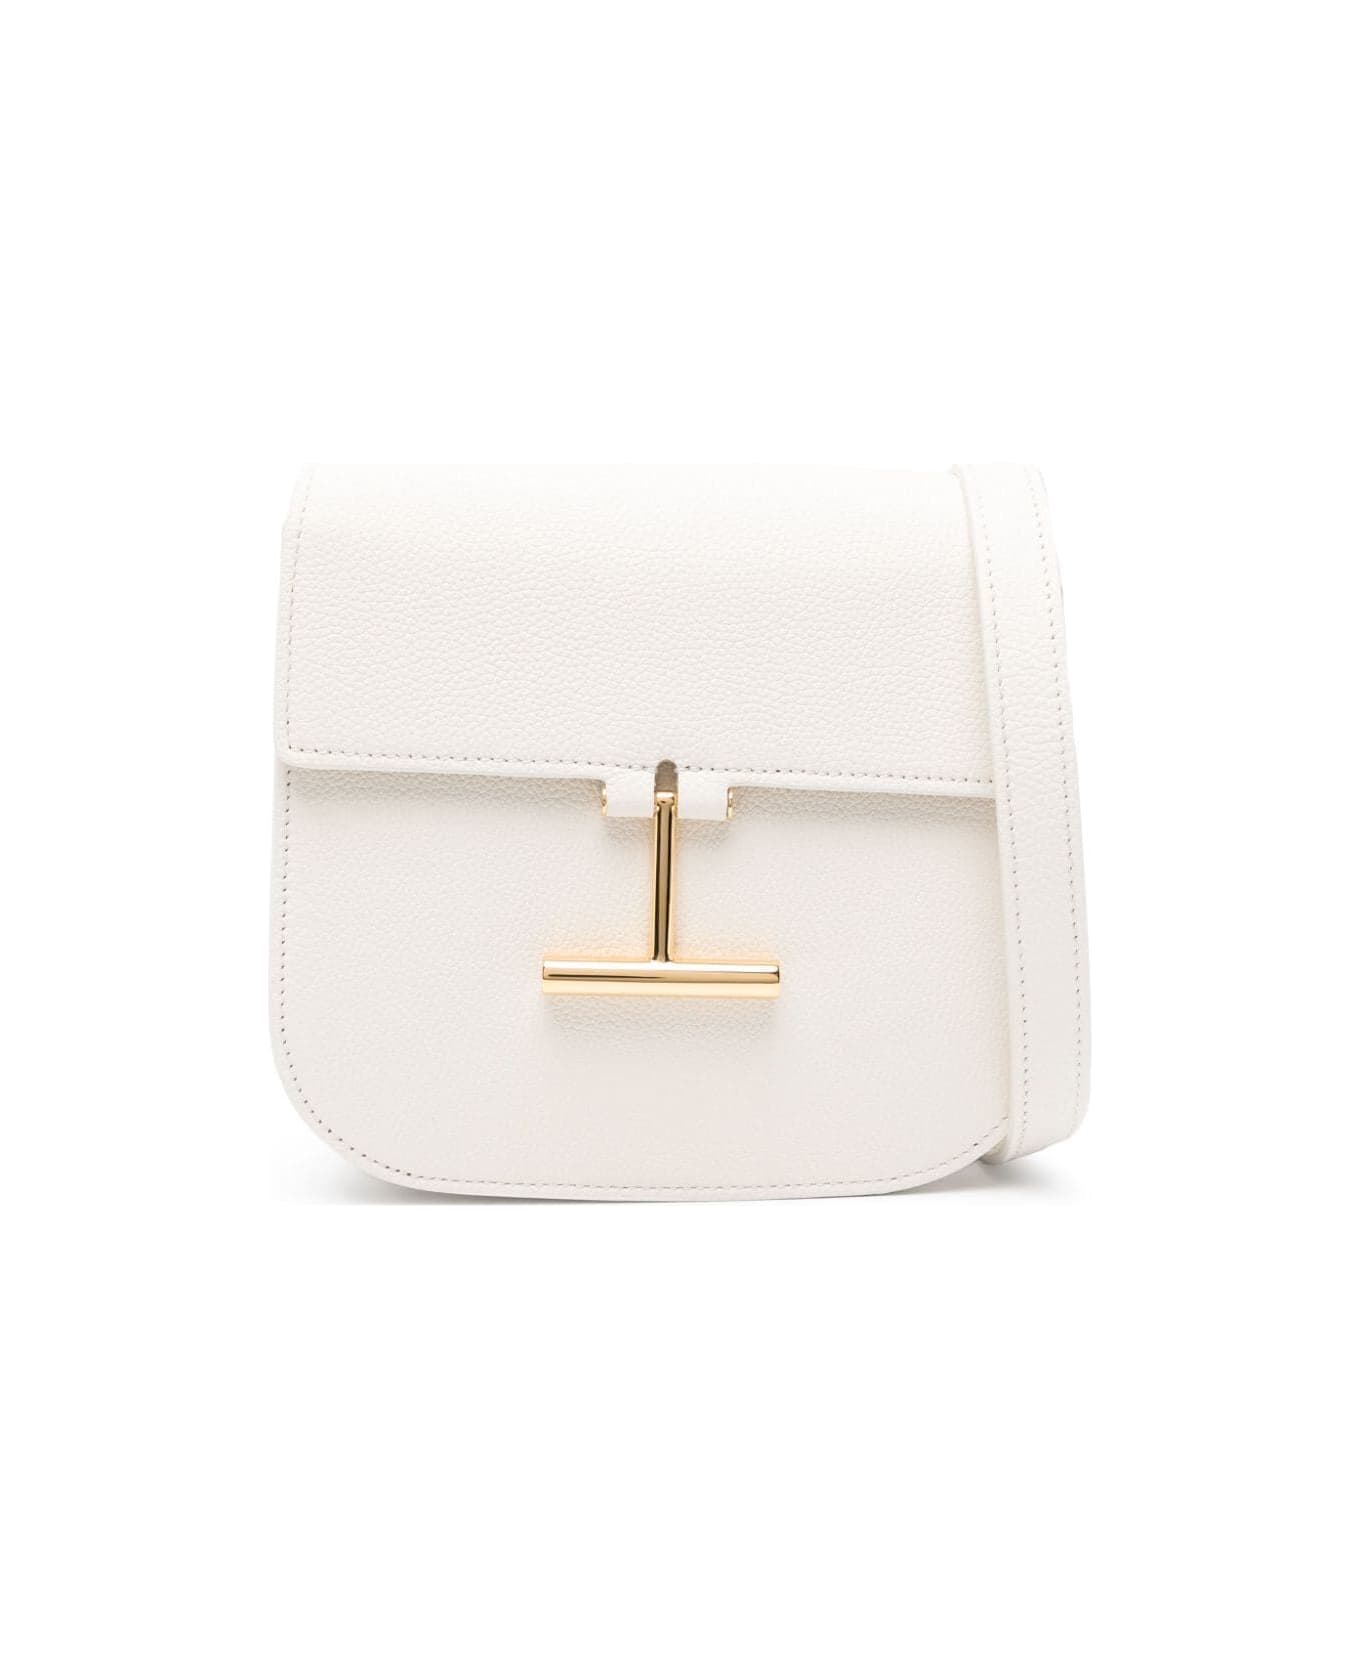 Tom Ford Shoulder And Crossbody Day Bag - White